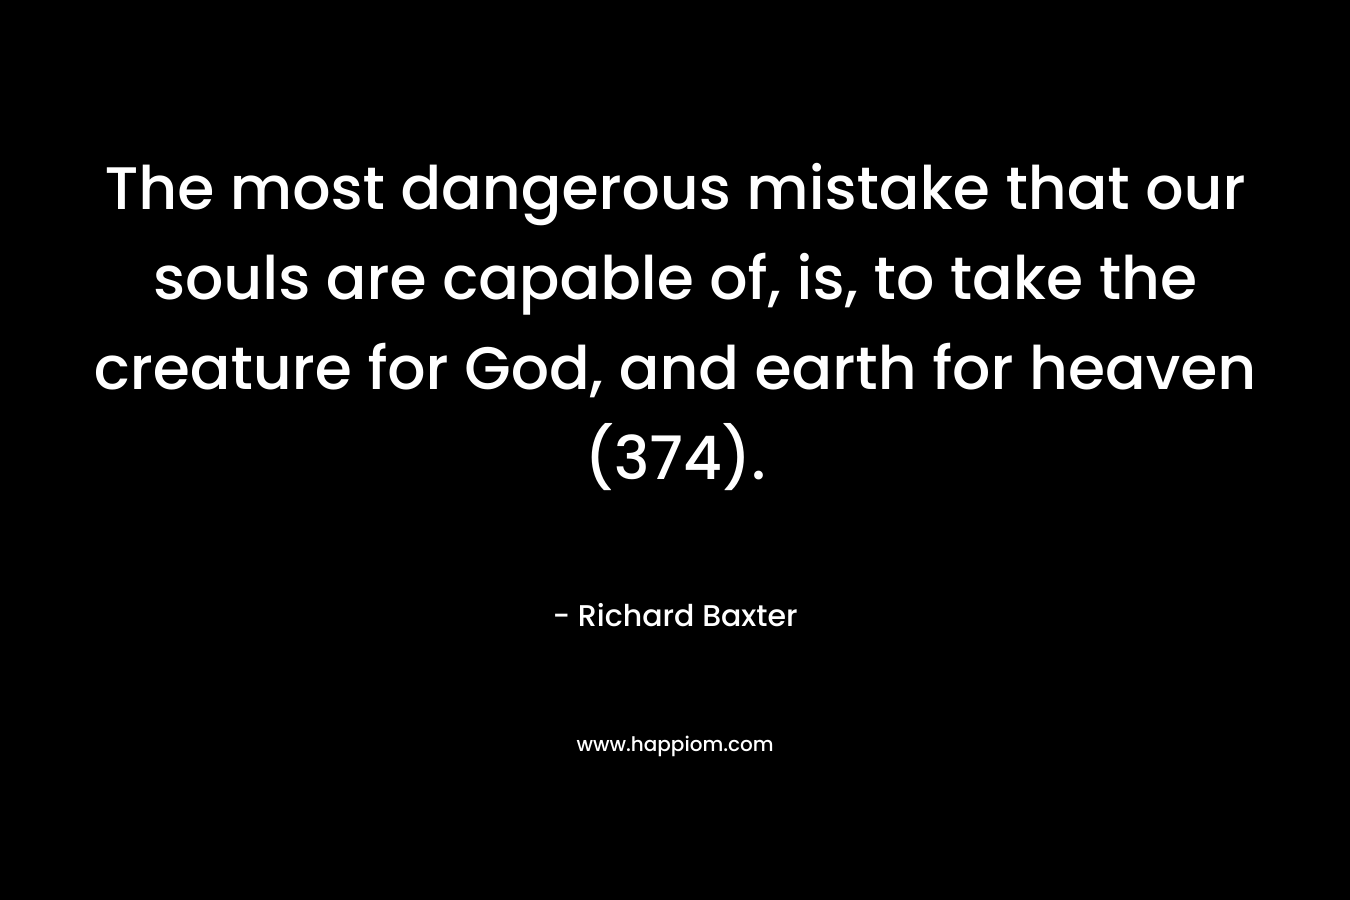 The most dangerous mistake that our souls are capable of, is, to take the creature for God, and earth for heaven (374). – Richard Baxter